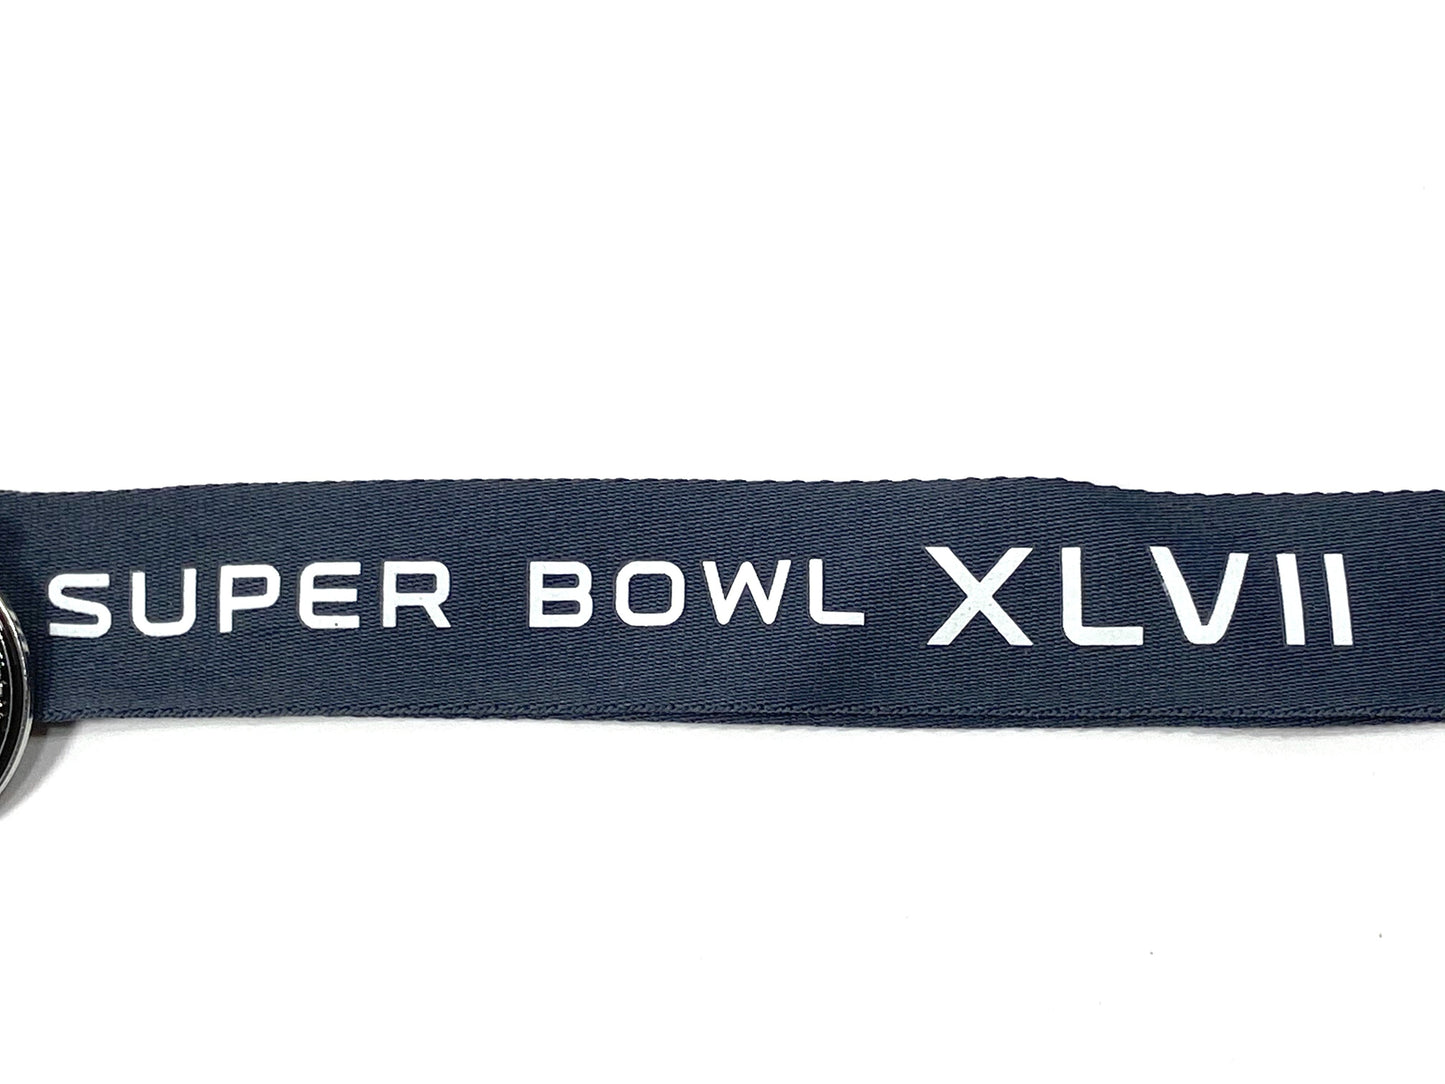 Super Bowl XLVII (47) Collectible Lanyard/Pin/Ticket Holder NOS By Pro Specialties Group